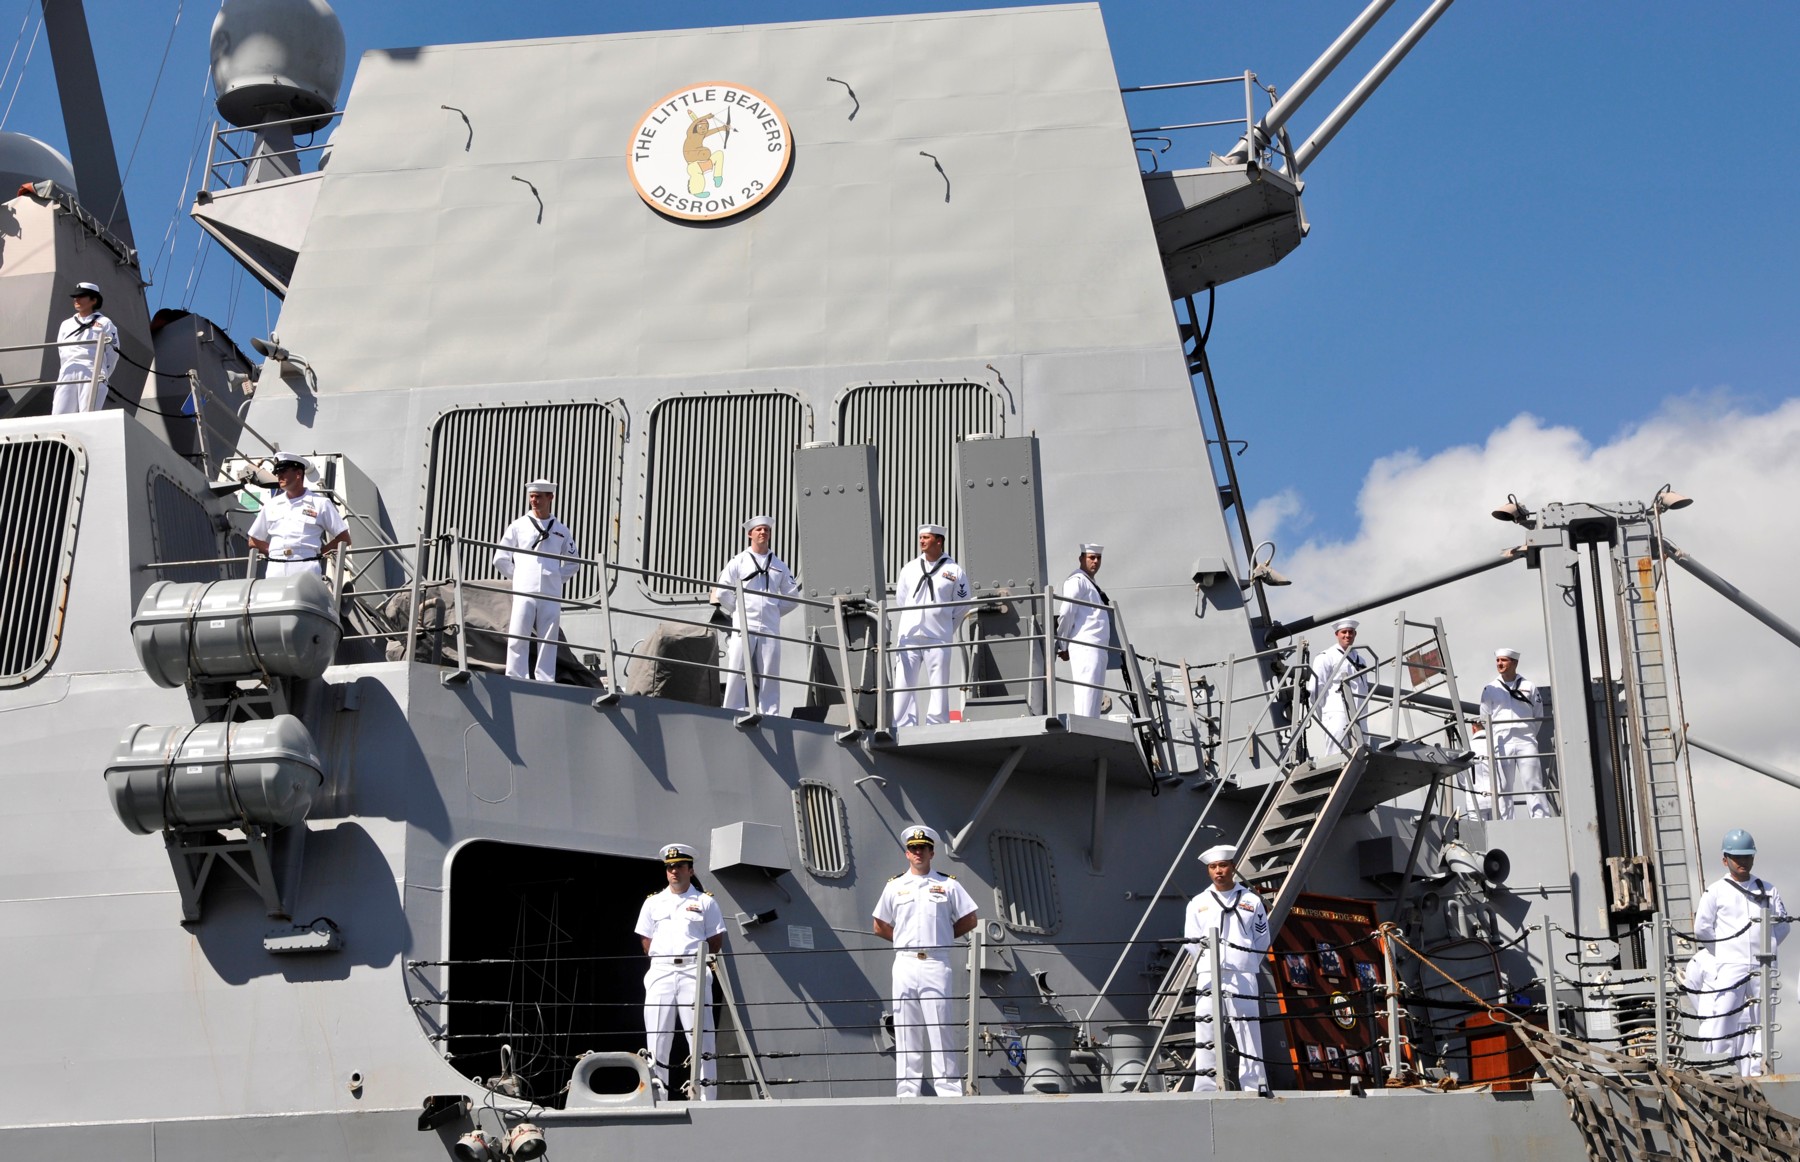 ddg-102 uss sampson arleigh burke class guided missile destroyer aegis us navy joint base pearl harbor hickam hawaii 19